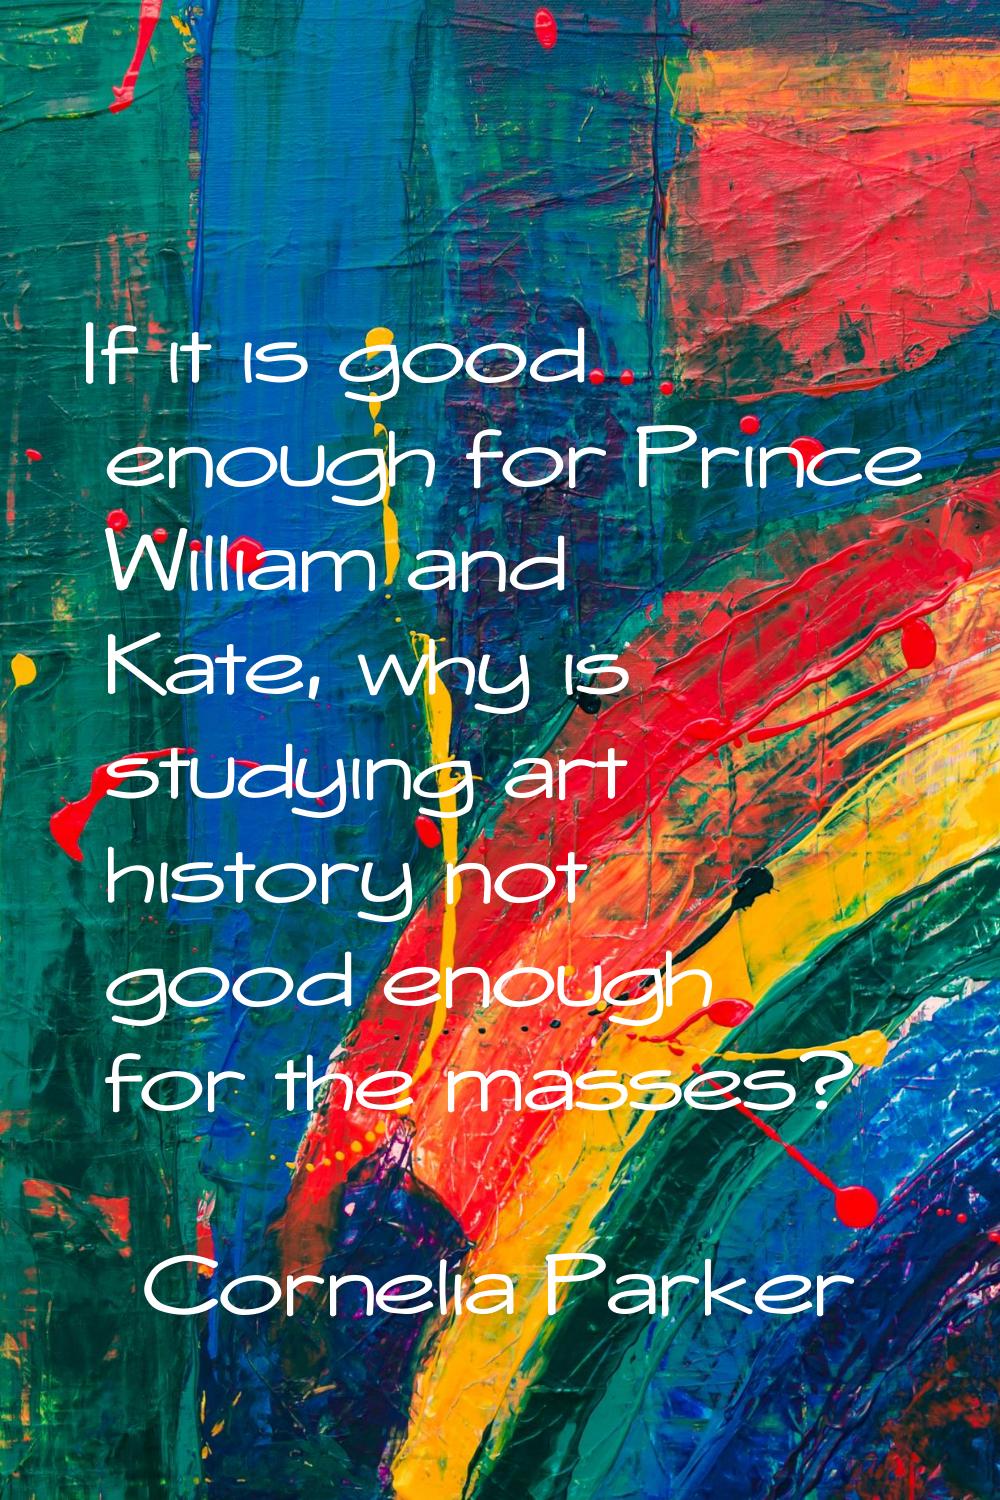 If it is good enough for Prince William and Kate, why is studying art history not good enough for t